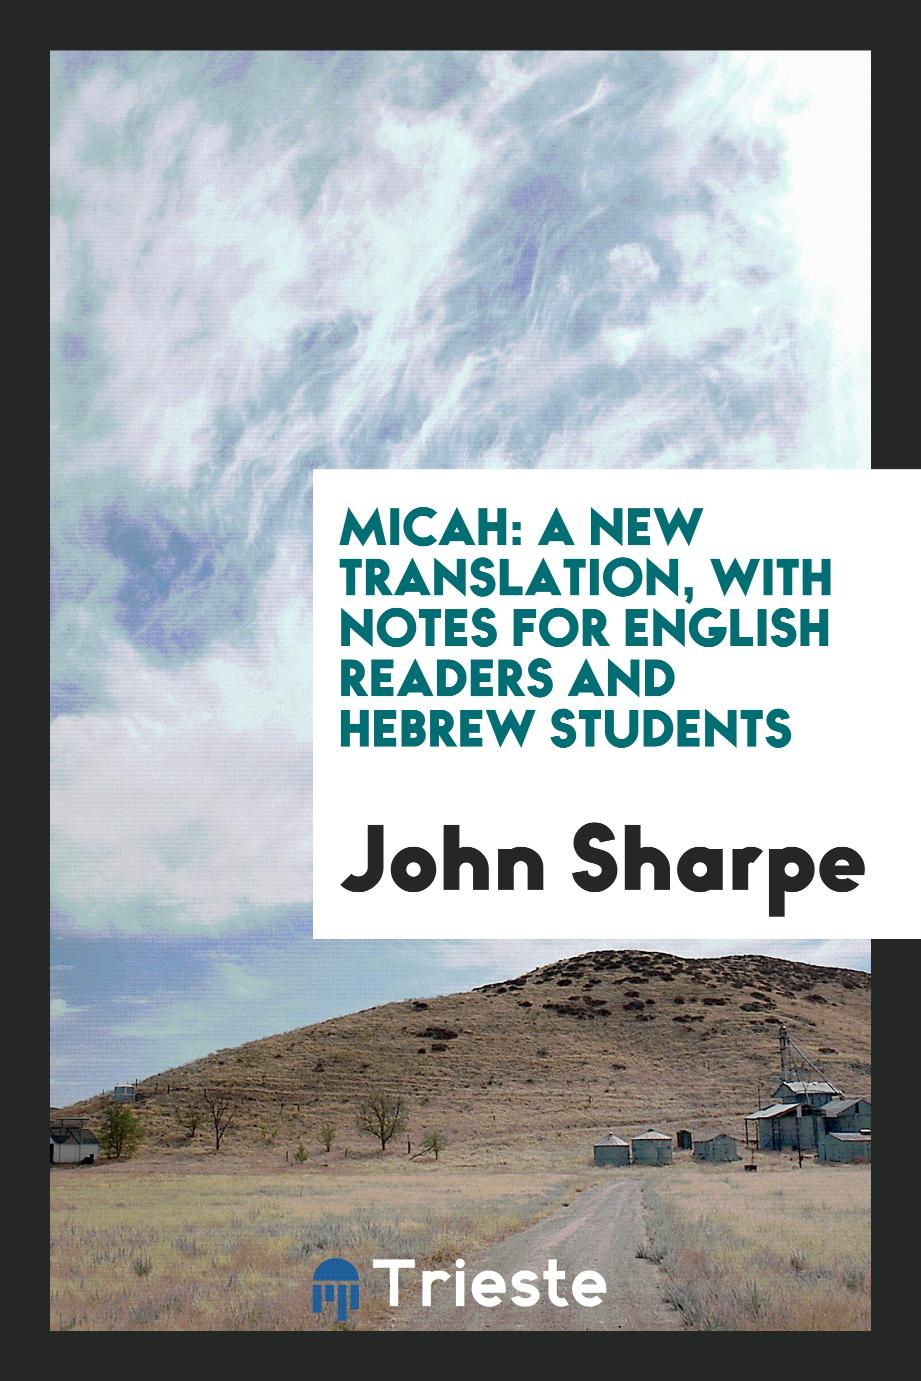 Micah: A New Translation, with Notes for English Readers and Hebrew Students